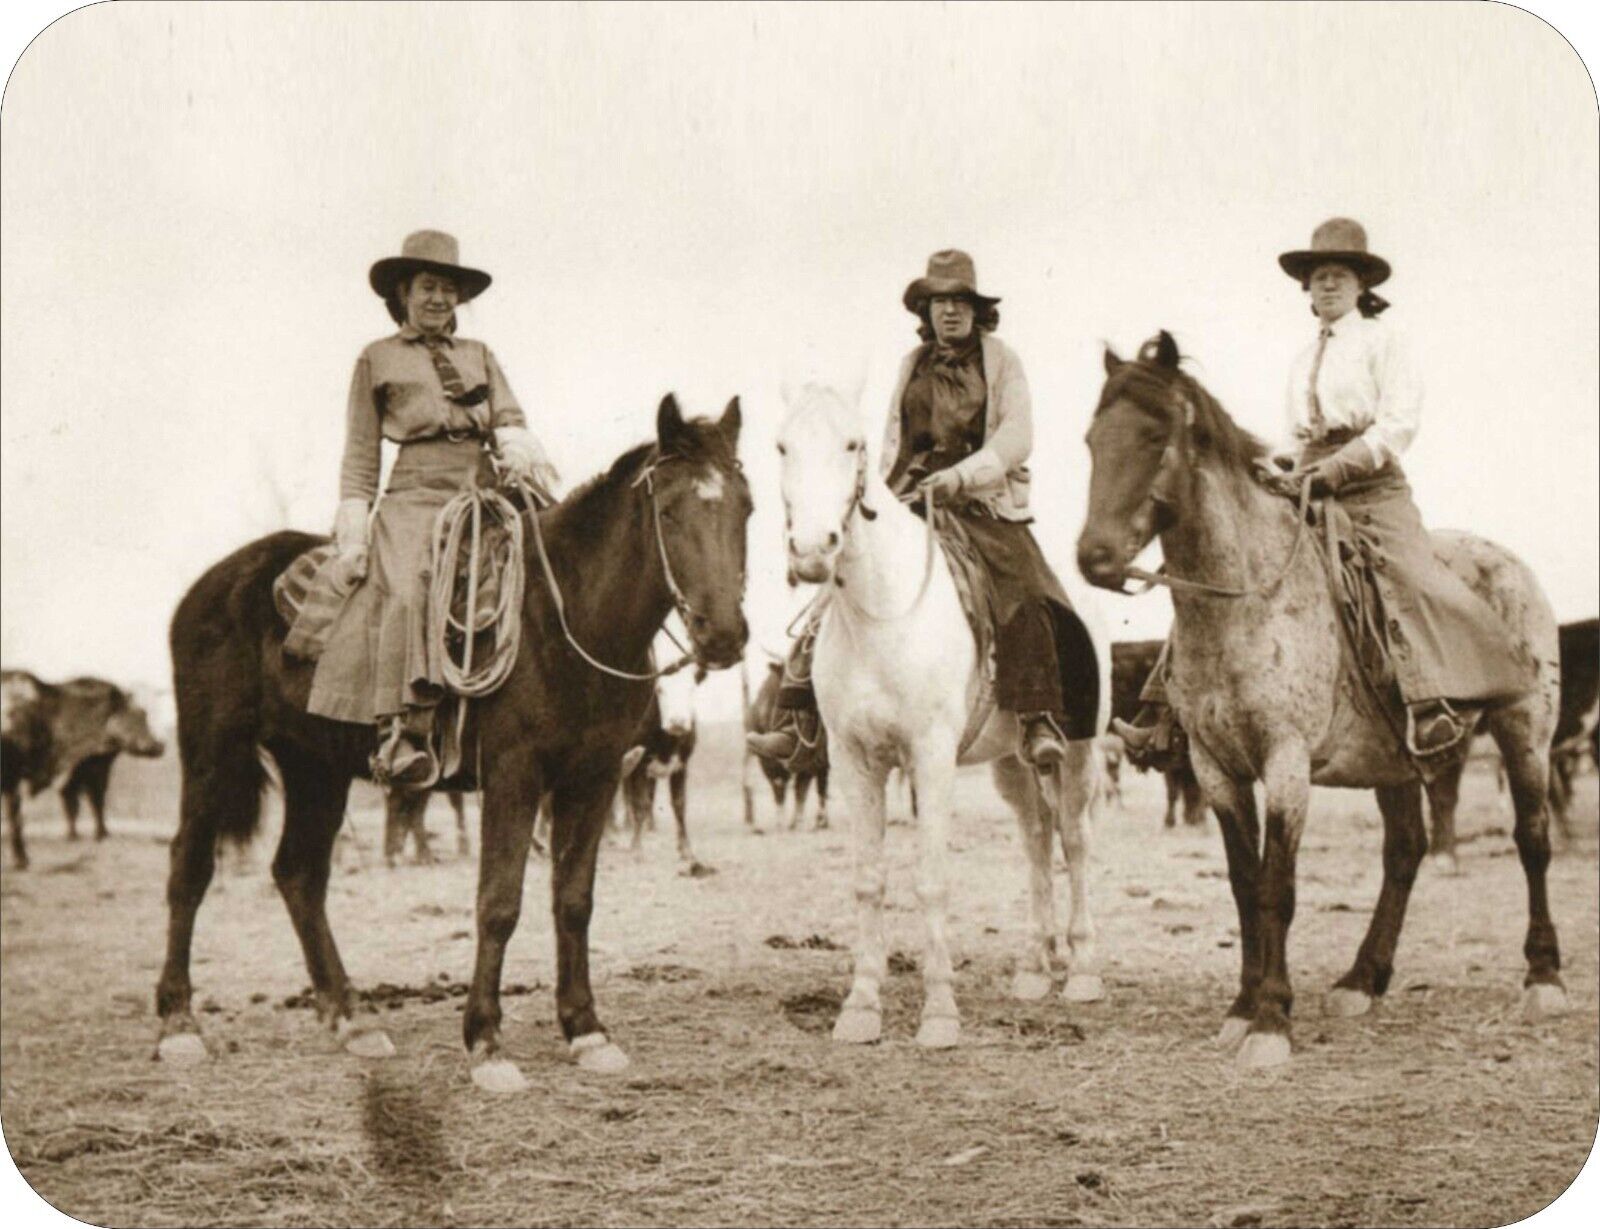 3 More Rodeo Cowgirls Photo On Horseback Art Standard Mouse Pad Vintage 1931